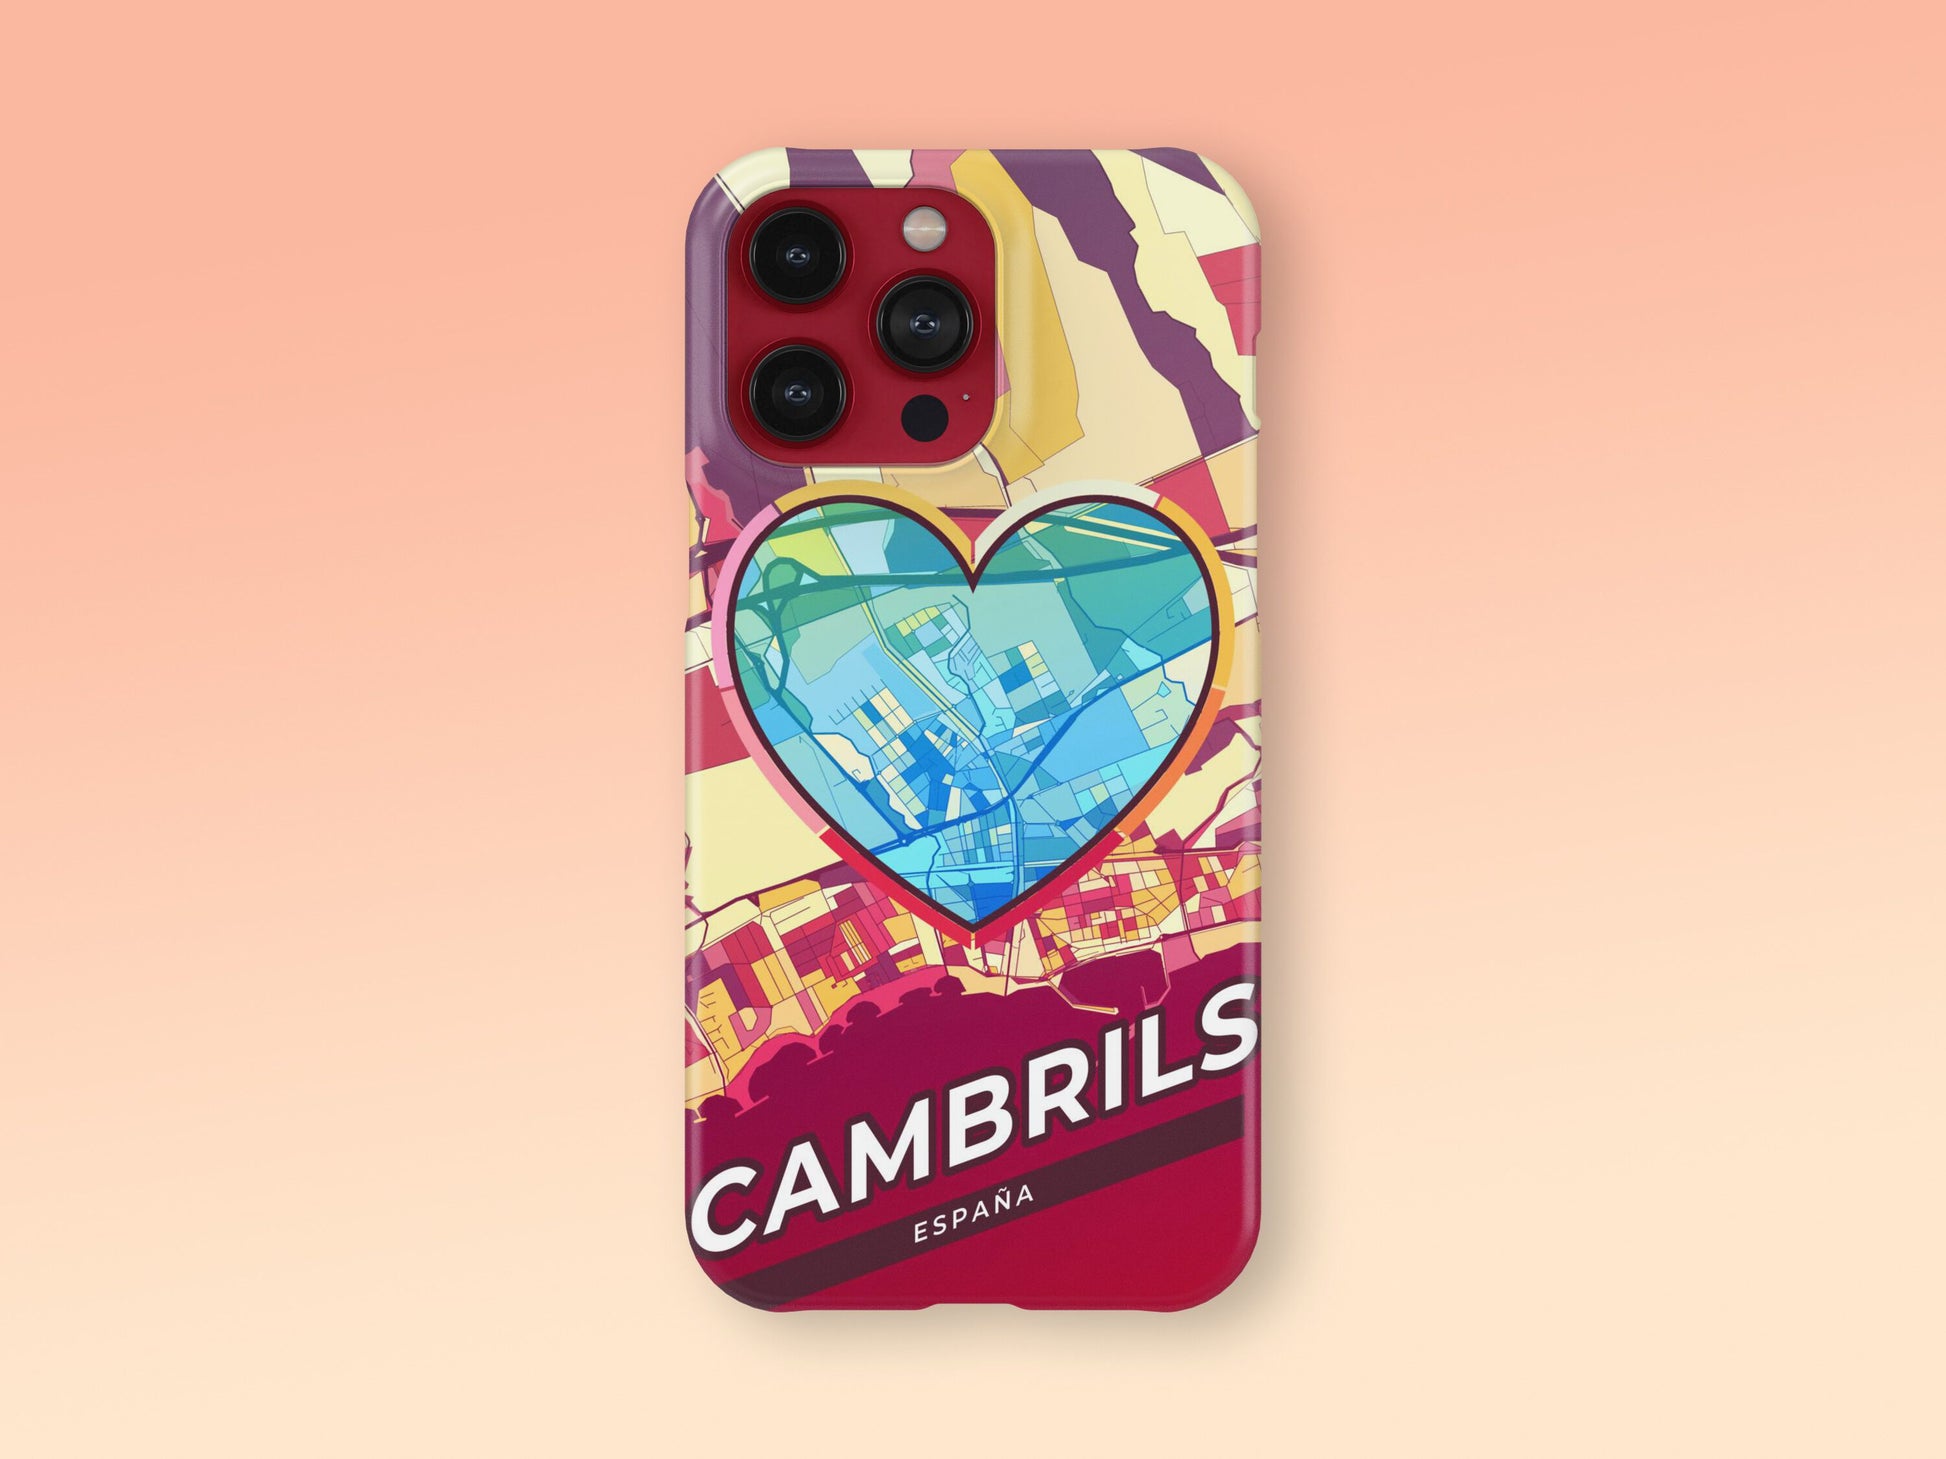 Cambrils Spain slim phone case with colorful icon. Birthday, wedding or housewarming gift. Couple match cases. 2